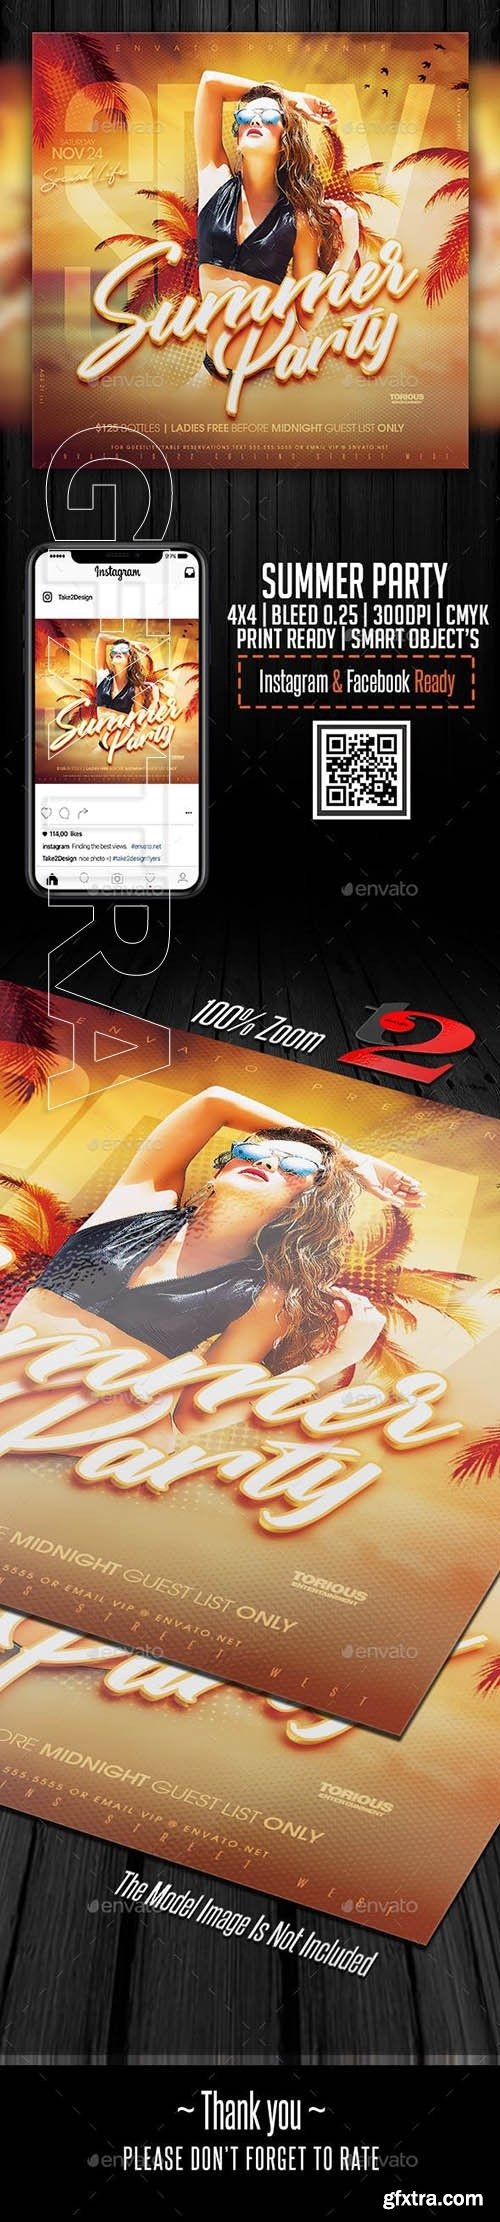 GraphicRiver - Summer Party Flyer Template 23488177